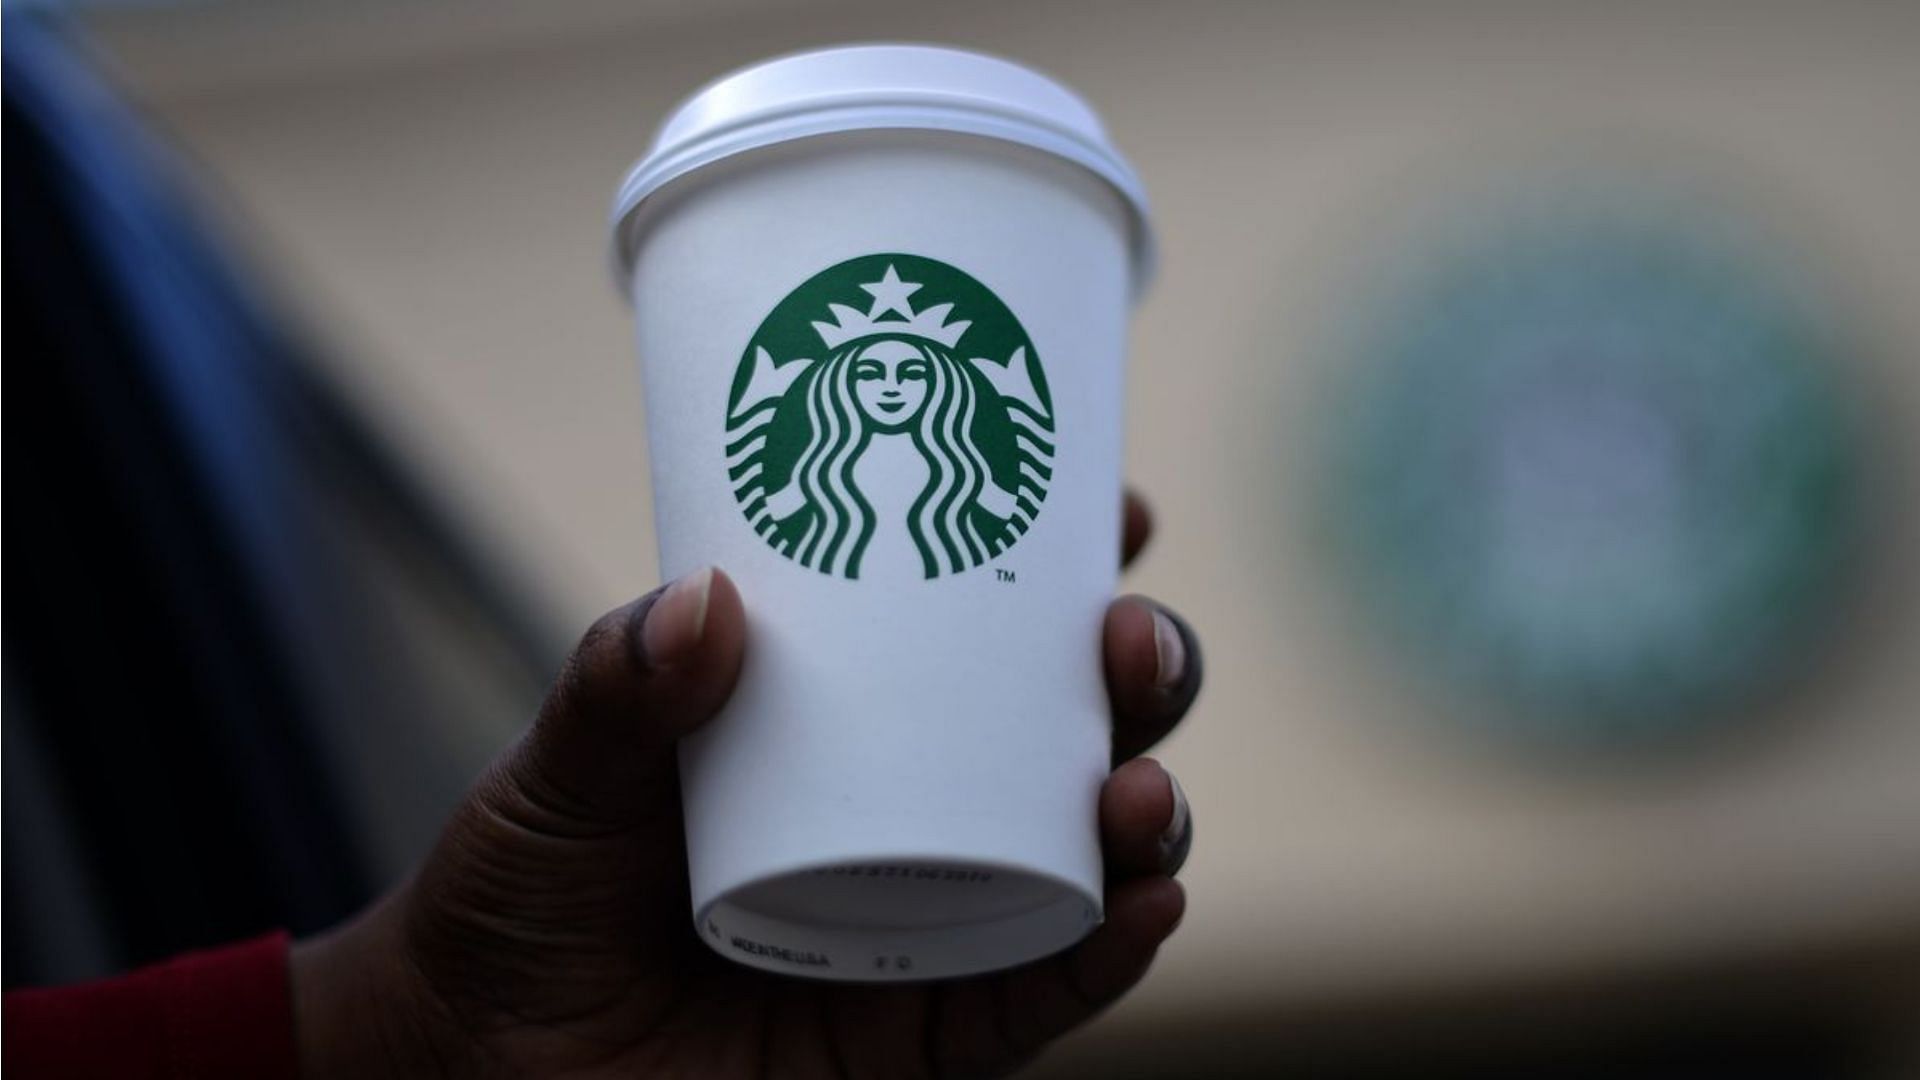 a woman holds a Stārbucks coffee cup in her hands (Image via Jewel SAMAD/Getty Images)